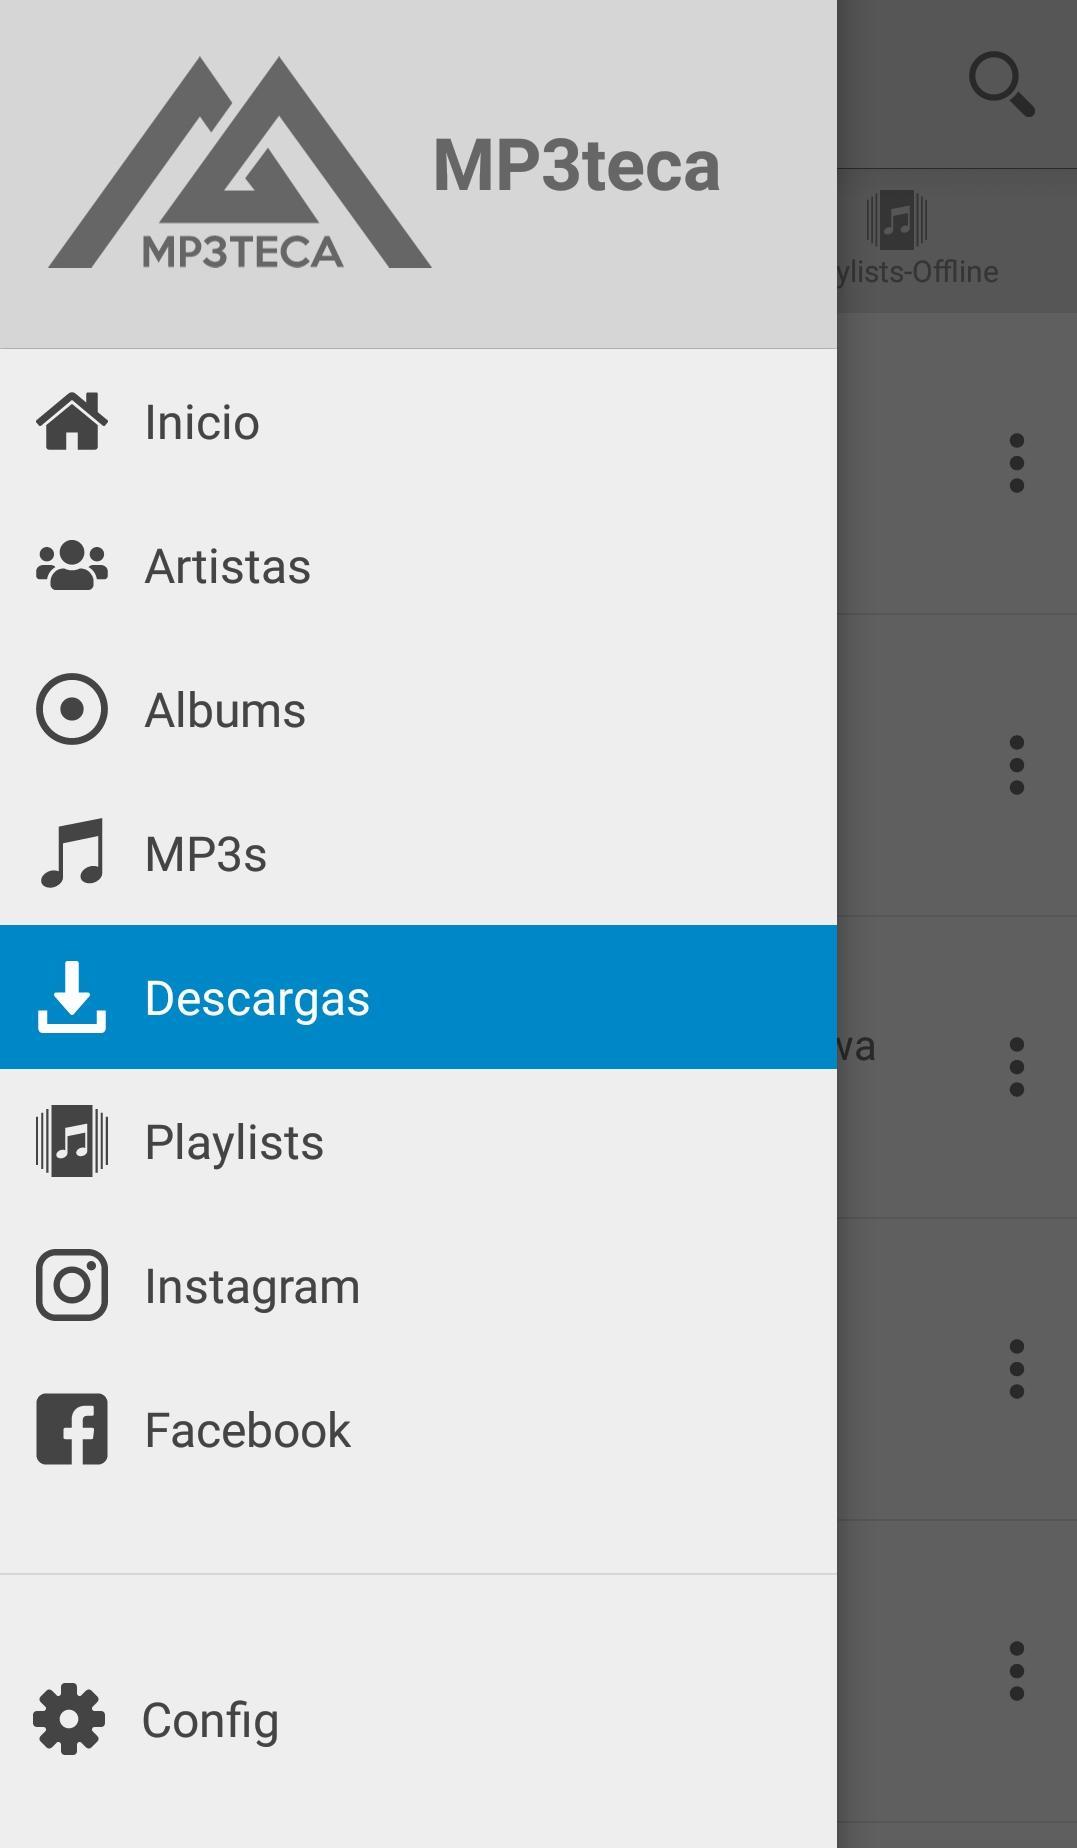 MP3teca for Android - APK Download